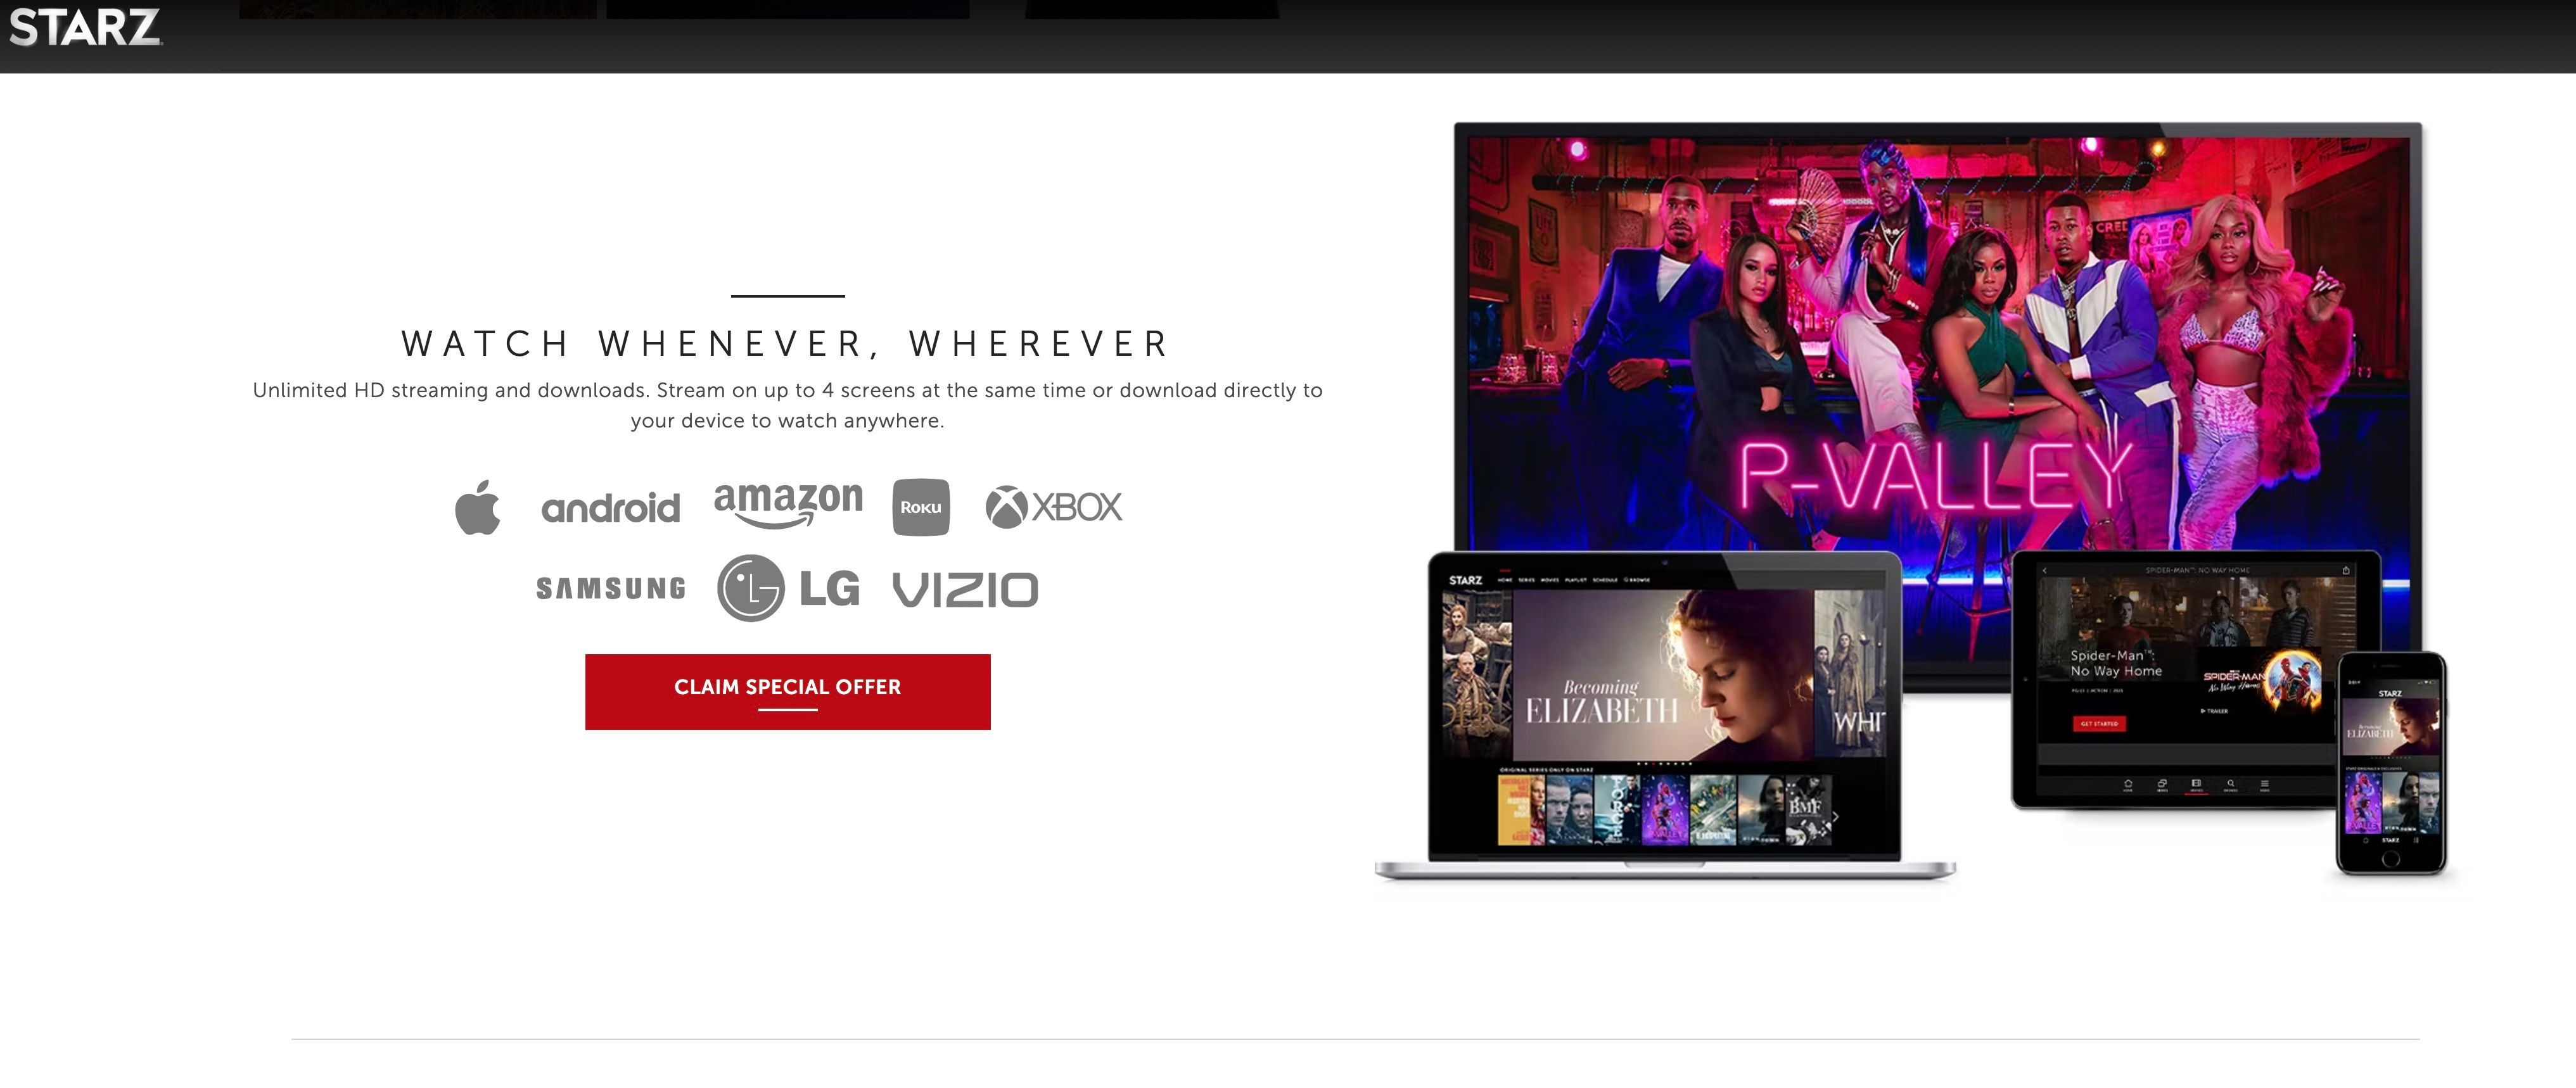 Starz Streaming Device Options with special offer button